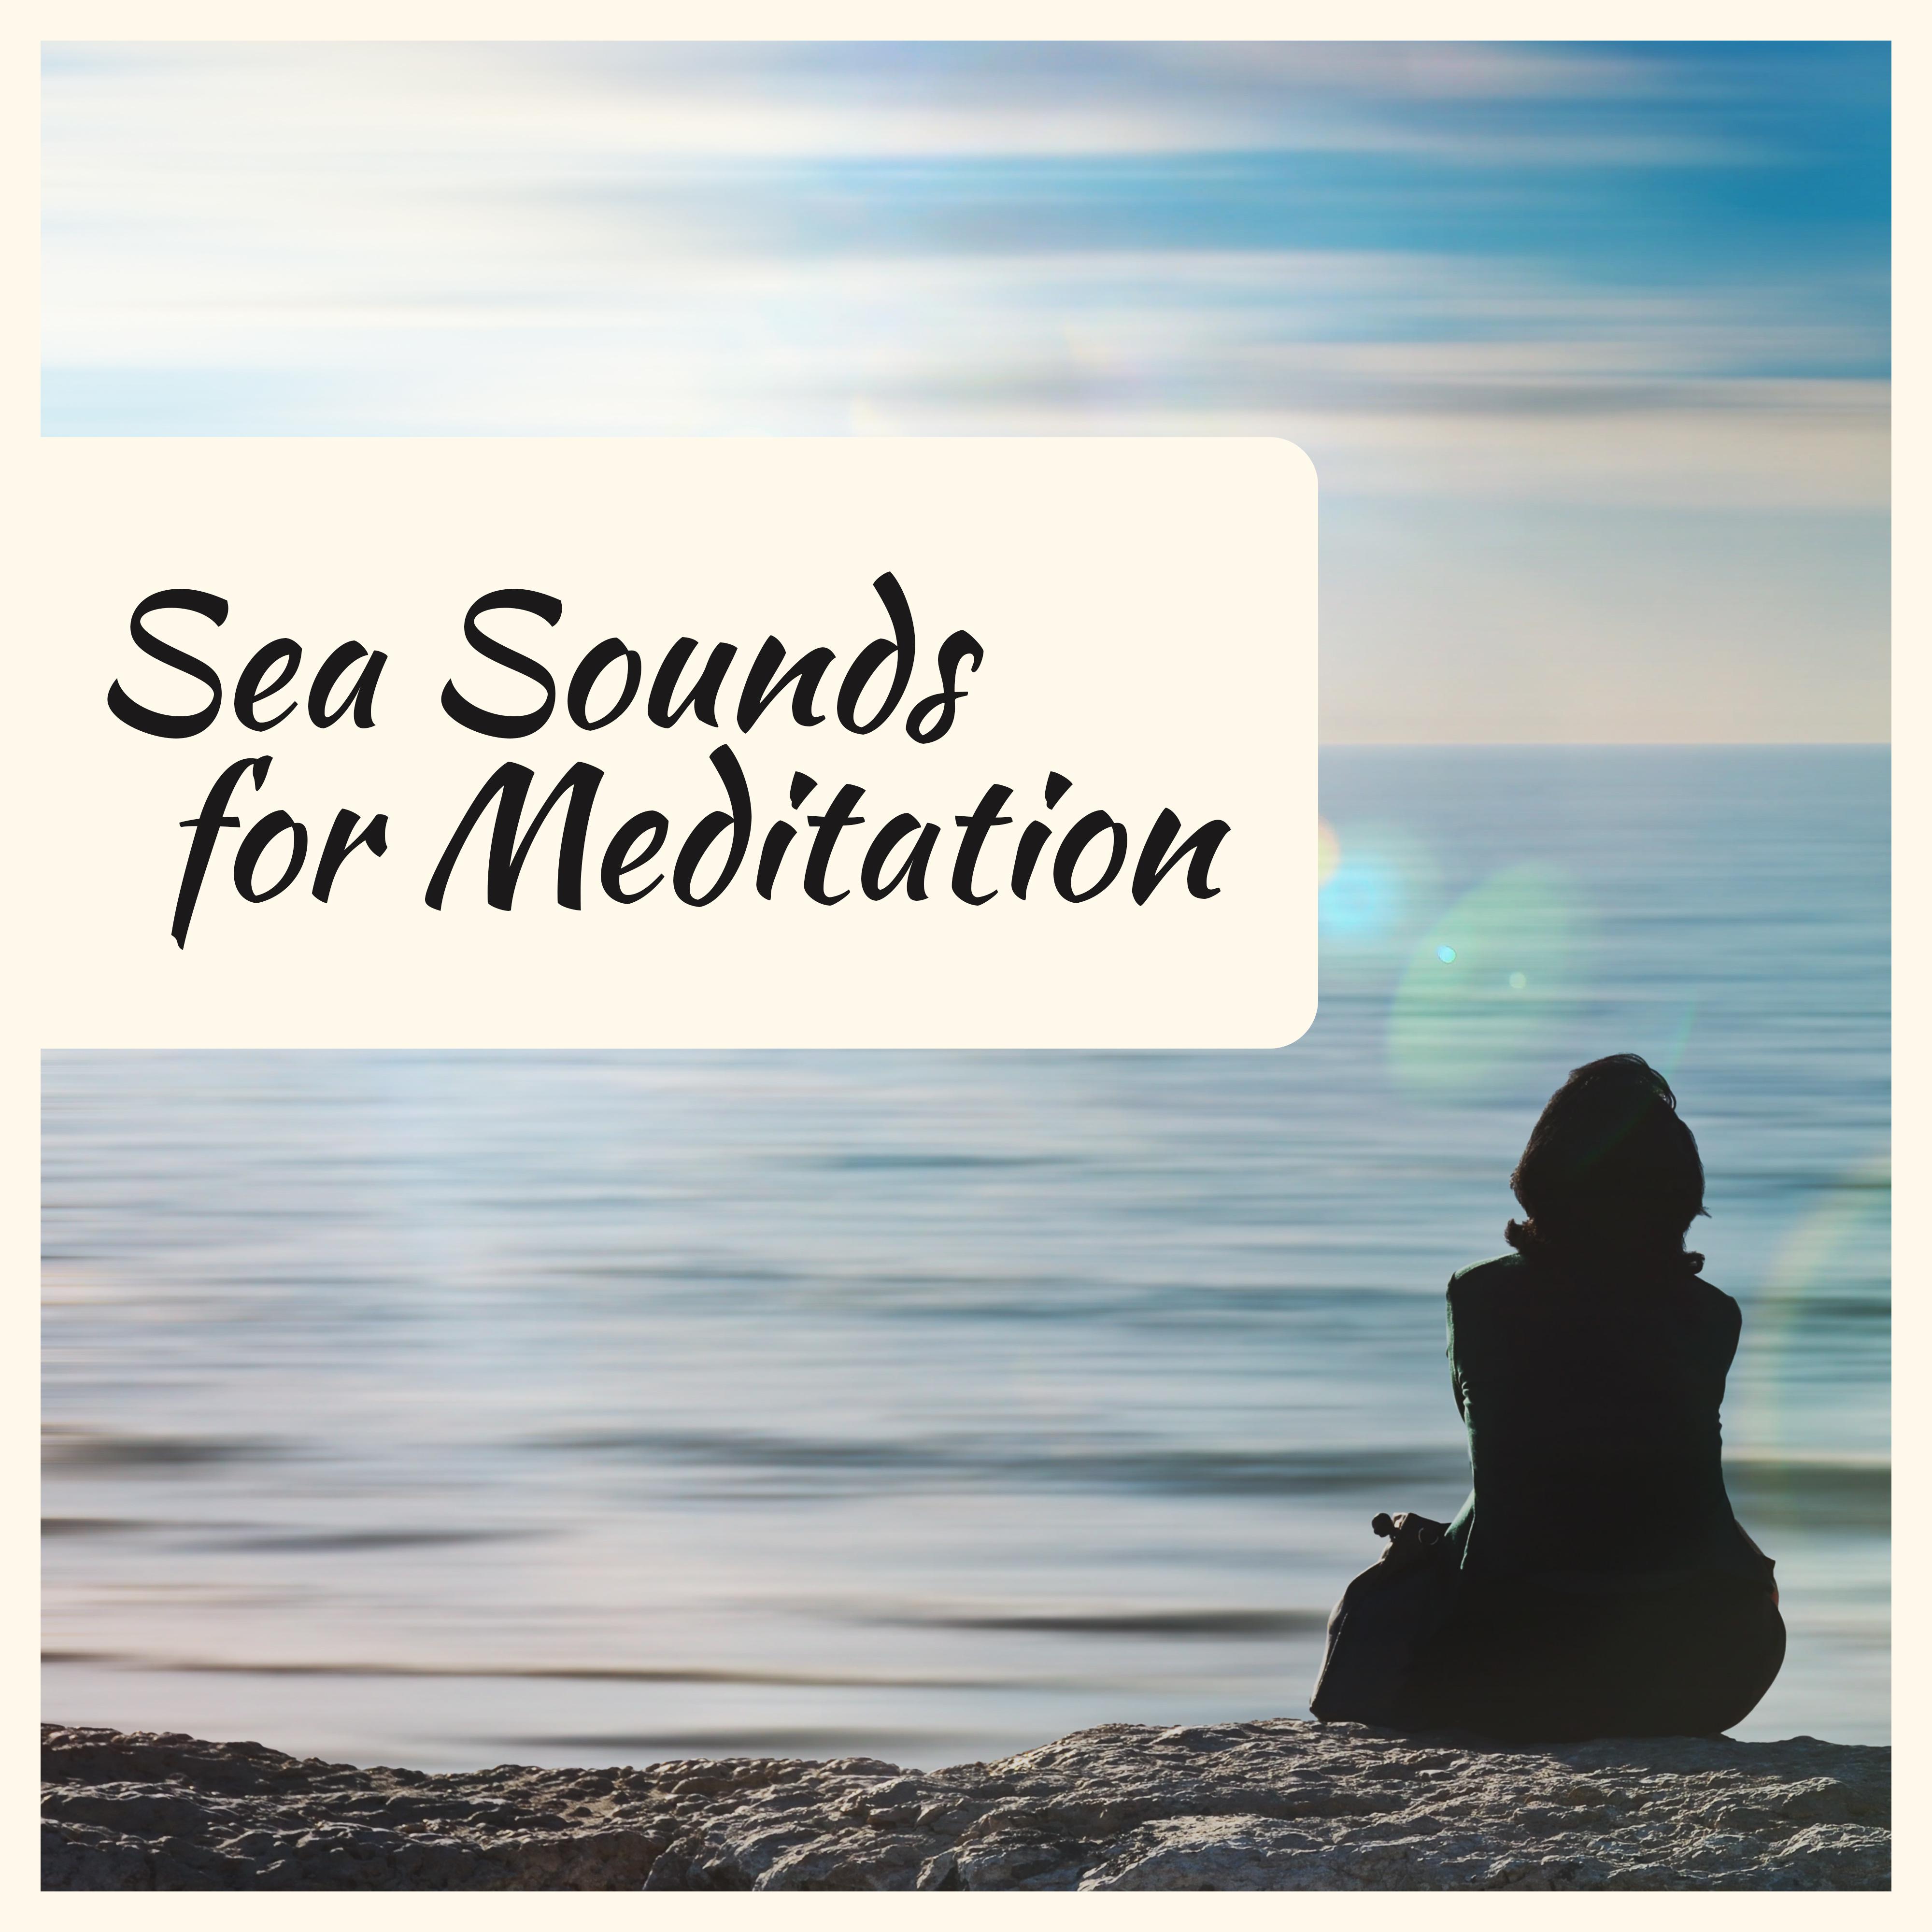 Sea Sounds for Meditation  Soft Music to Calm Down, Exercise Yoga, Pure Waves, Deep Relief, Relaxation Therapy, Peaceful Mind, Meditate